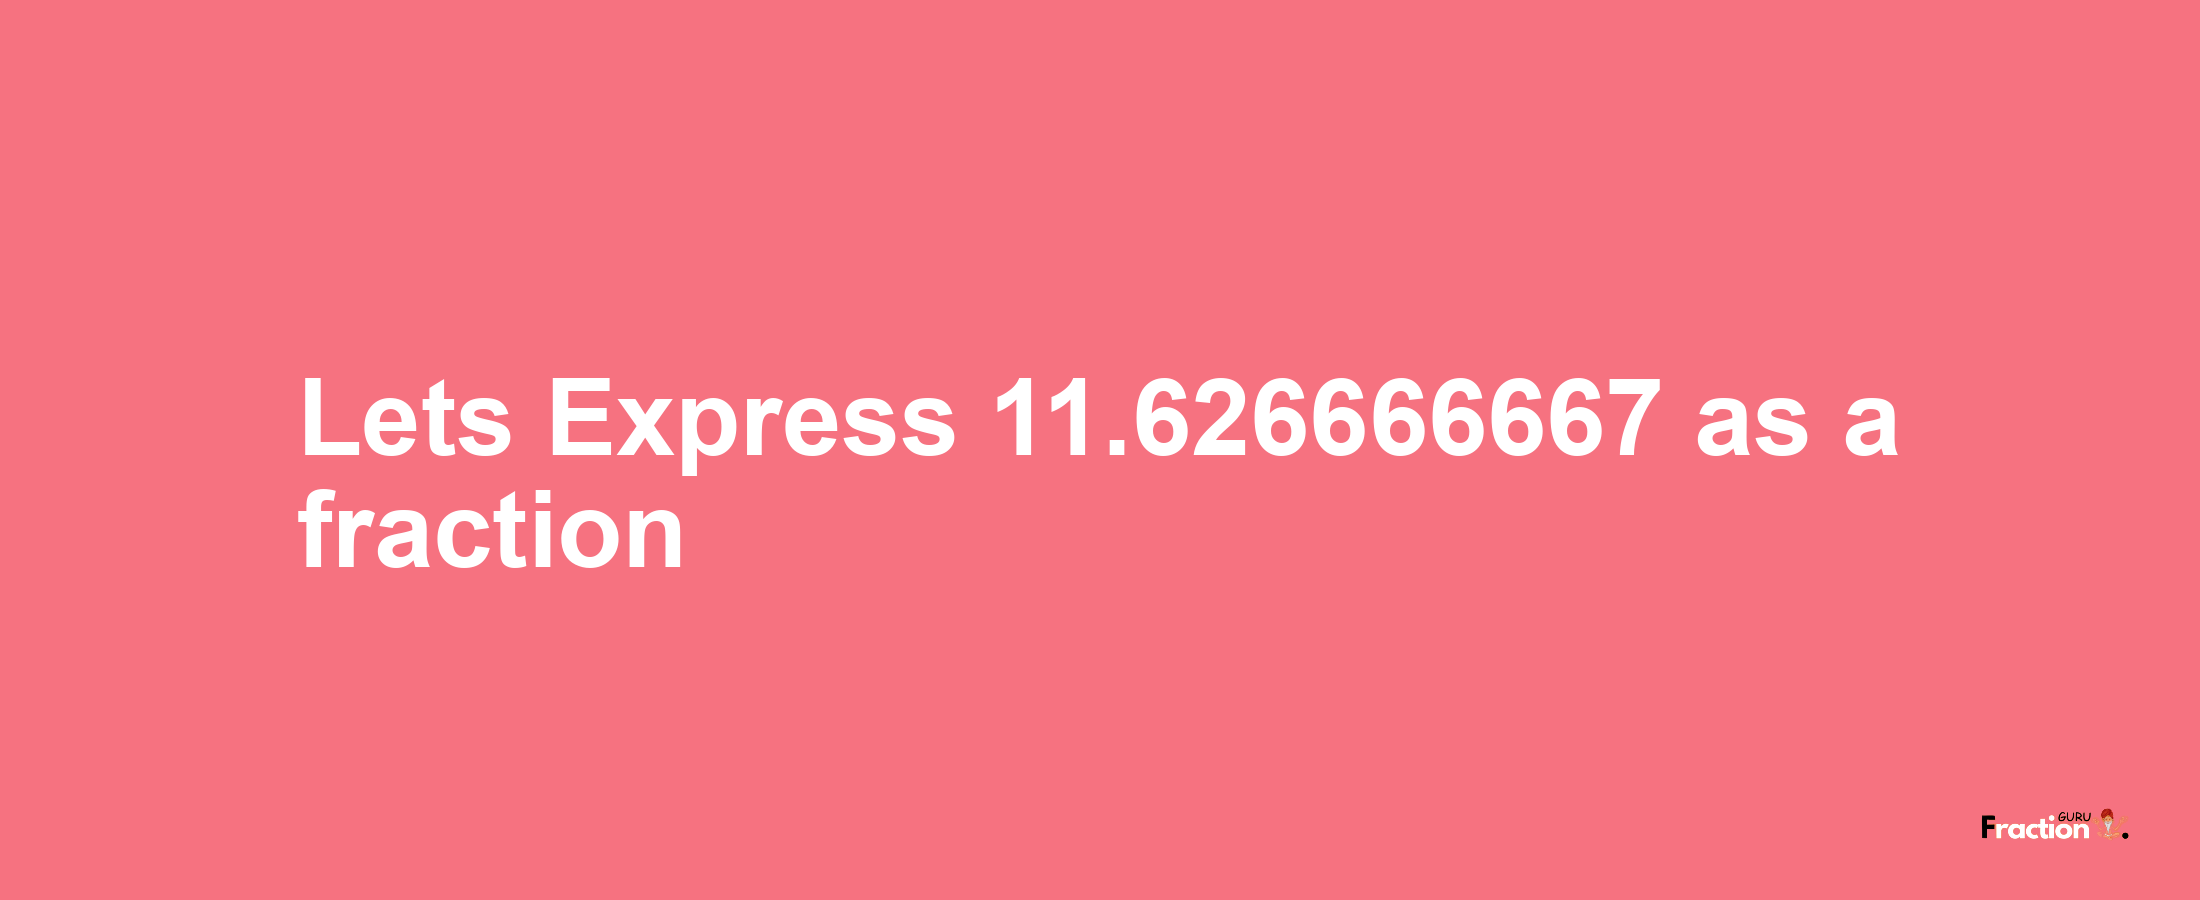 Lets Express 11.626666667 as afraction